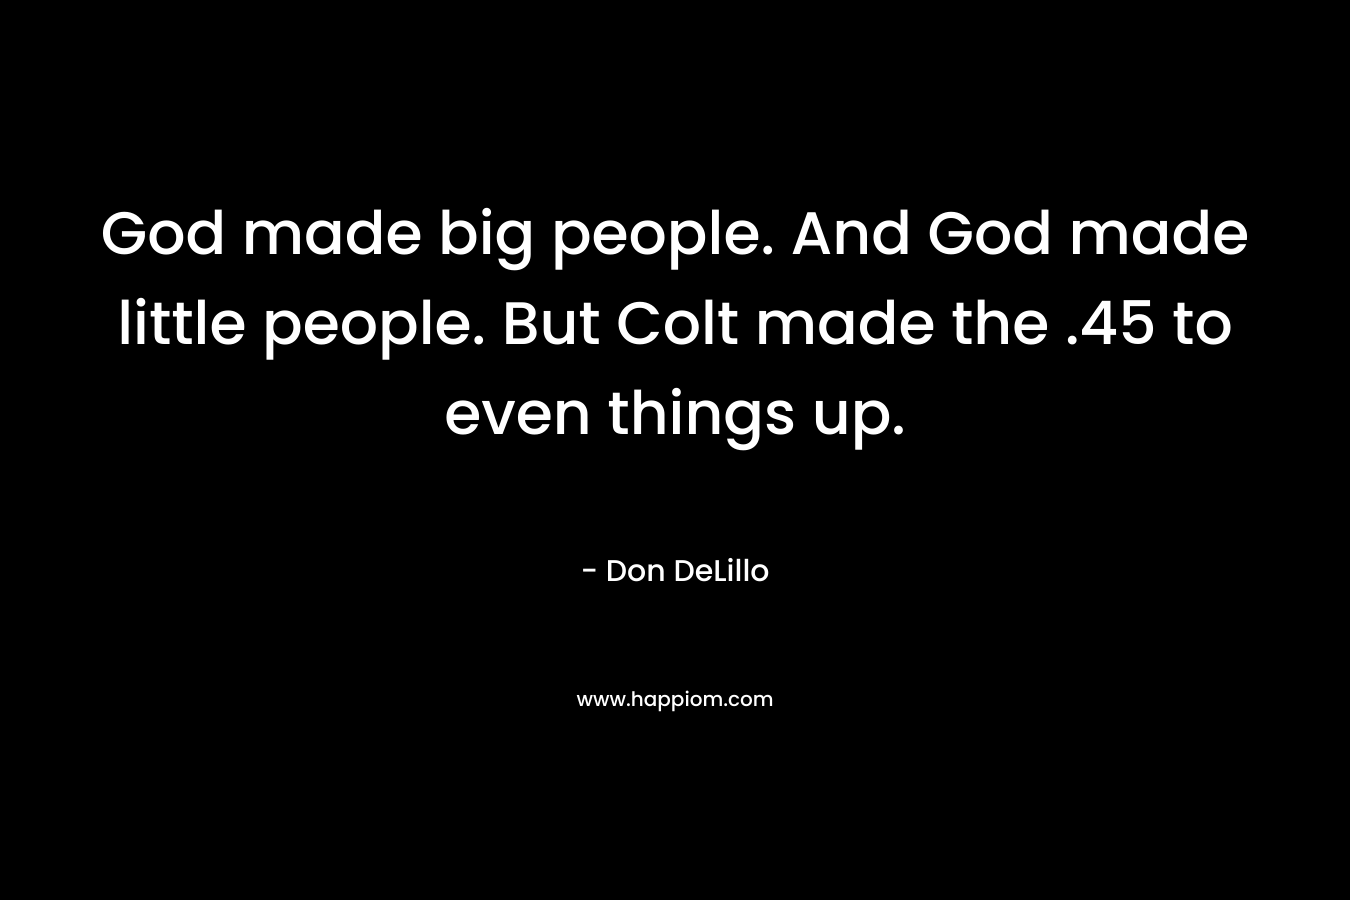 God made big people. And God made little people. But Colt made the .45 to even things up. – Don DeLillo